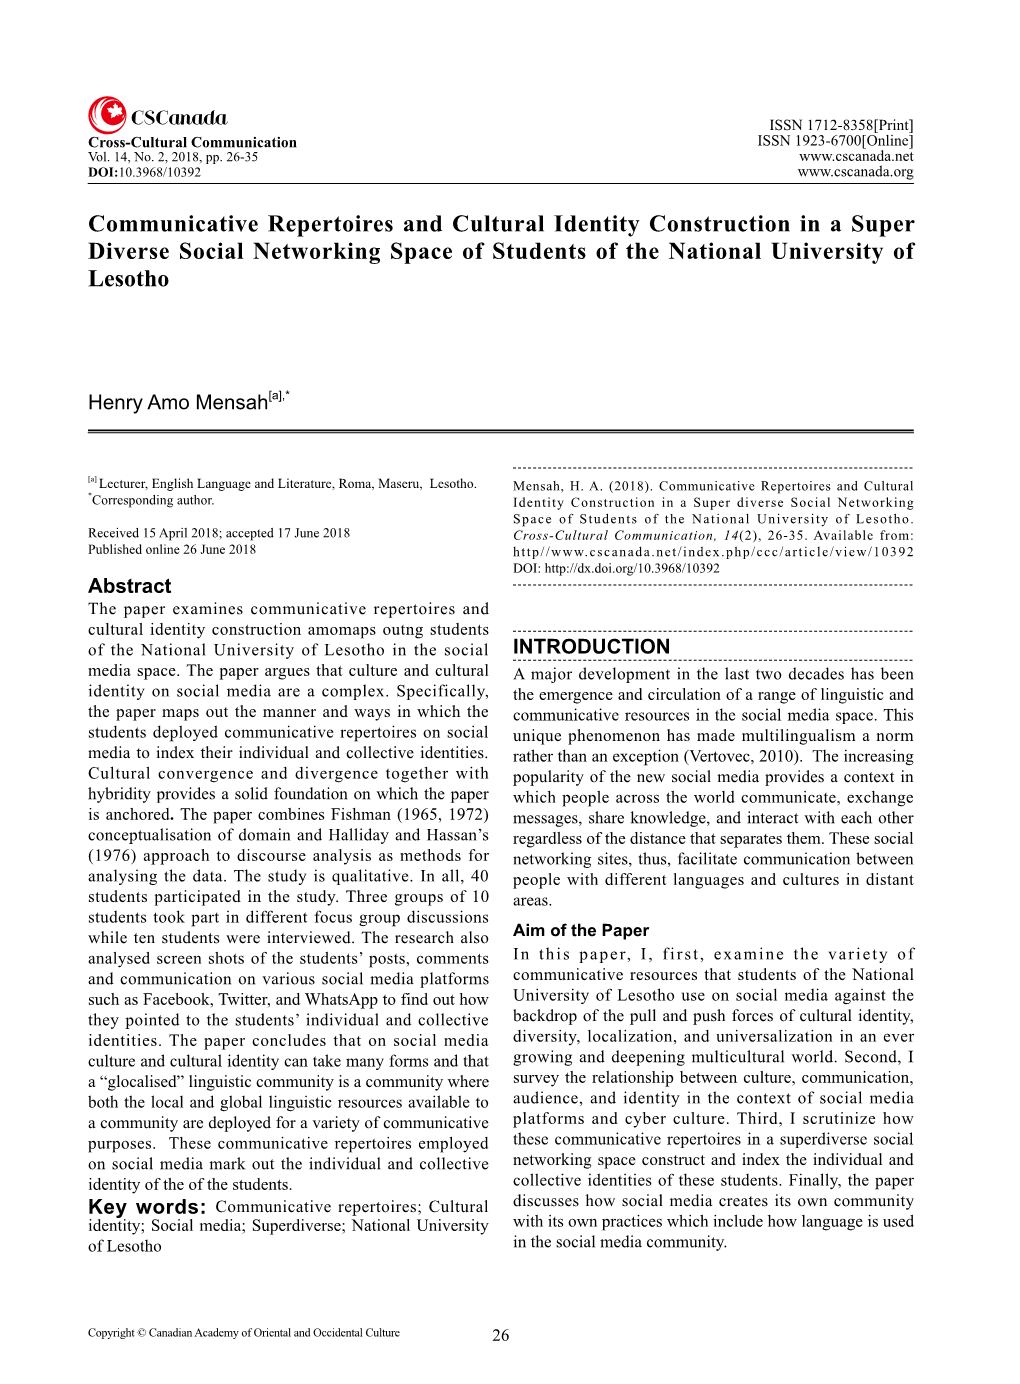 Communicative Repertoires and Cultural Identity Construction in a Super Diverse Social Networking Space of Students of the National University of Lesotho